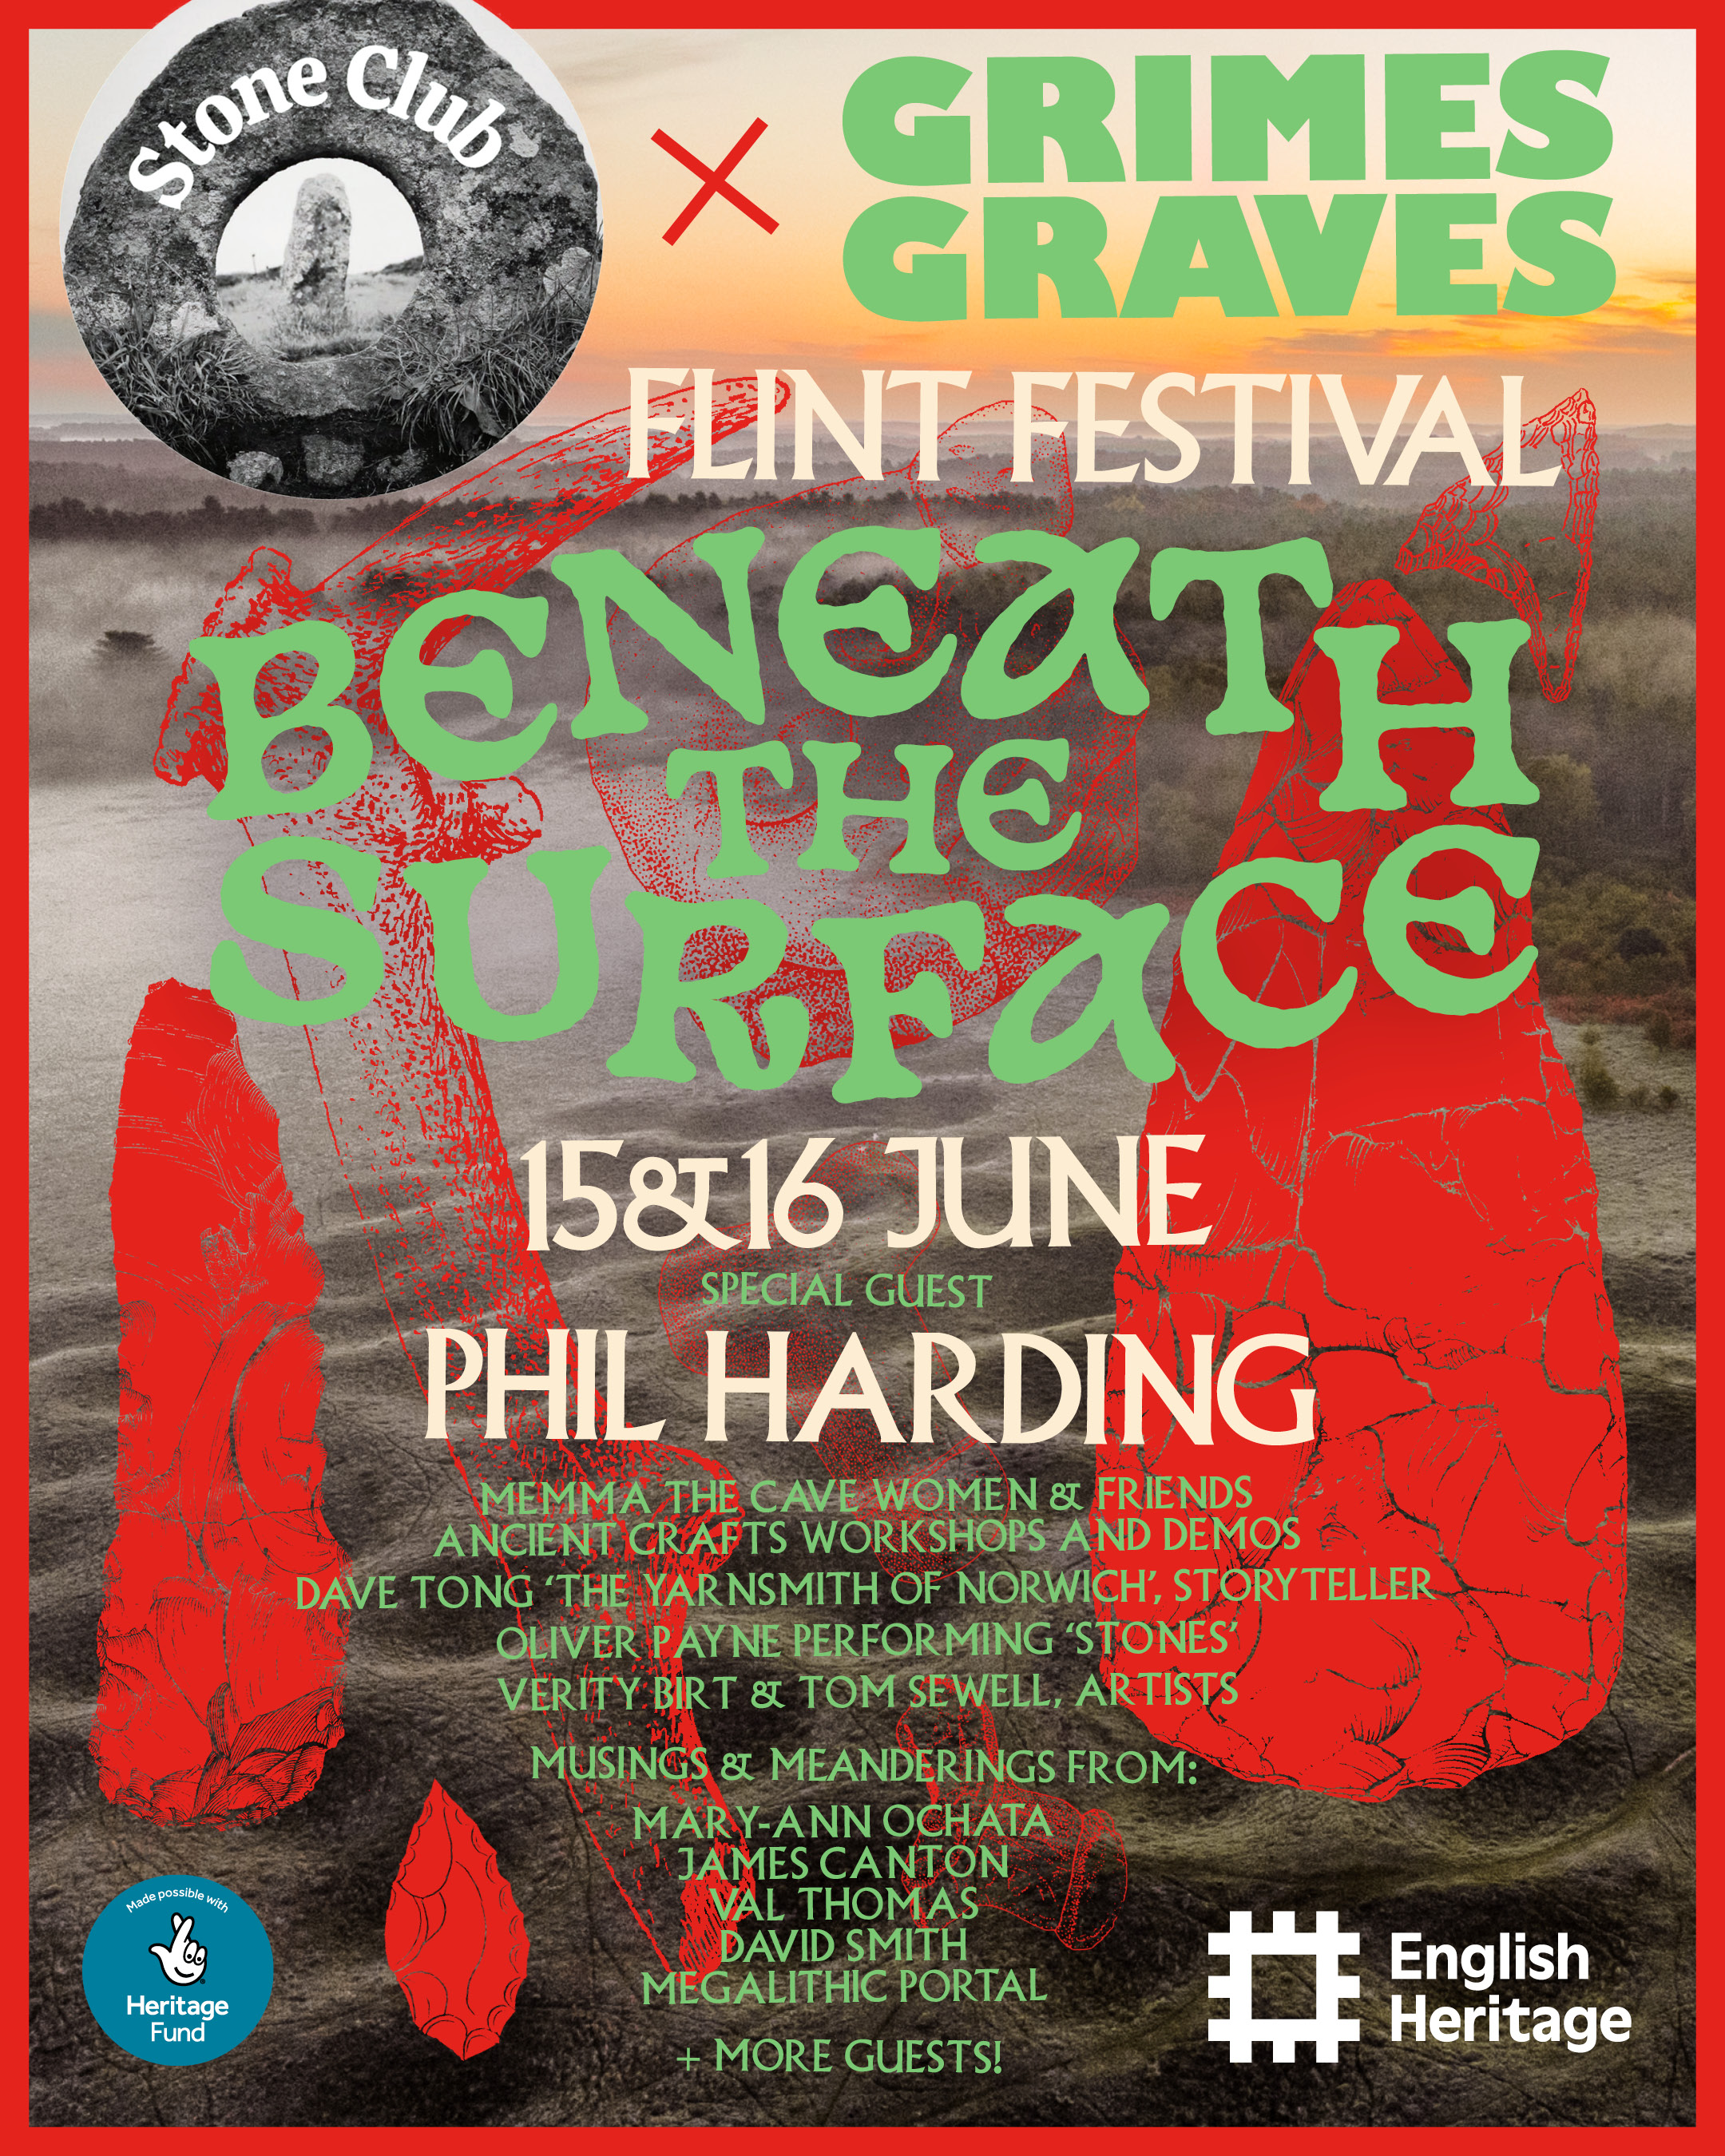 Image promoting the Grimes Graves Flint Festival, 'Beneath the Surface', on 15th and 16th June 2024, with images of knapped flint tools, the chalk goddess, over an aerial view of Grimes Graves, with text and various logos.